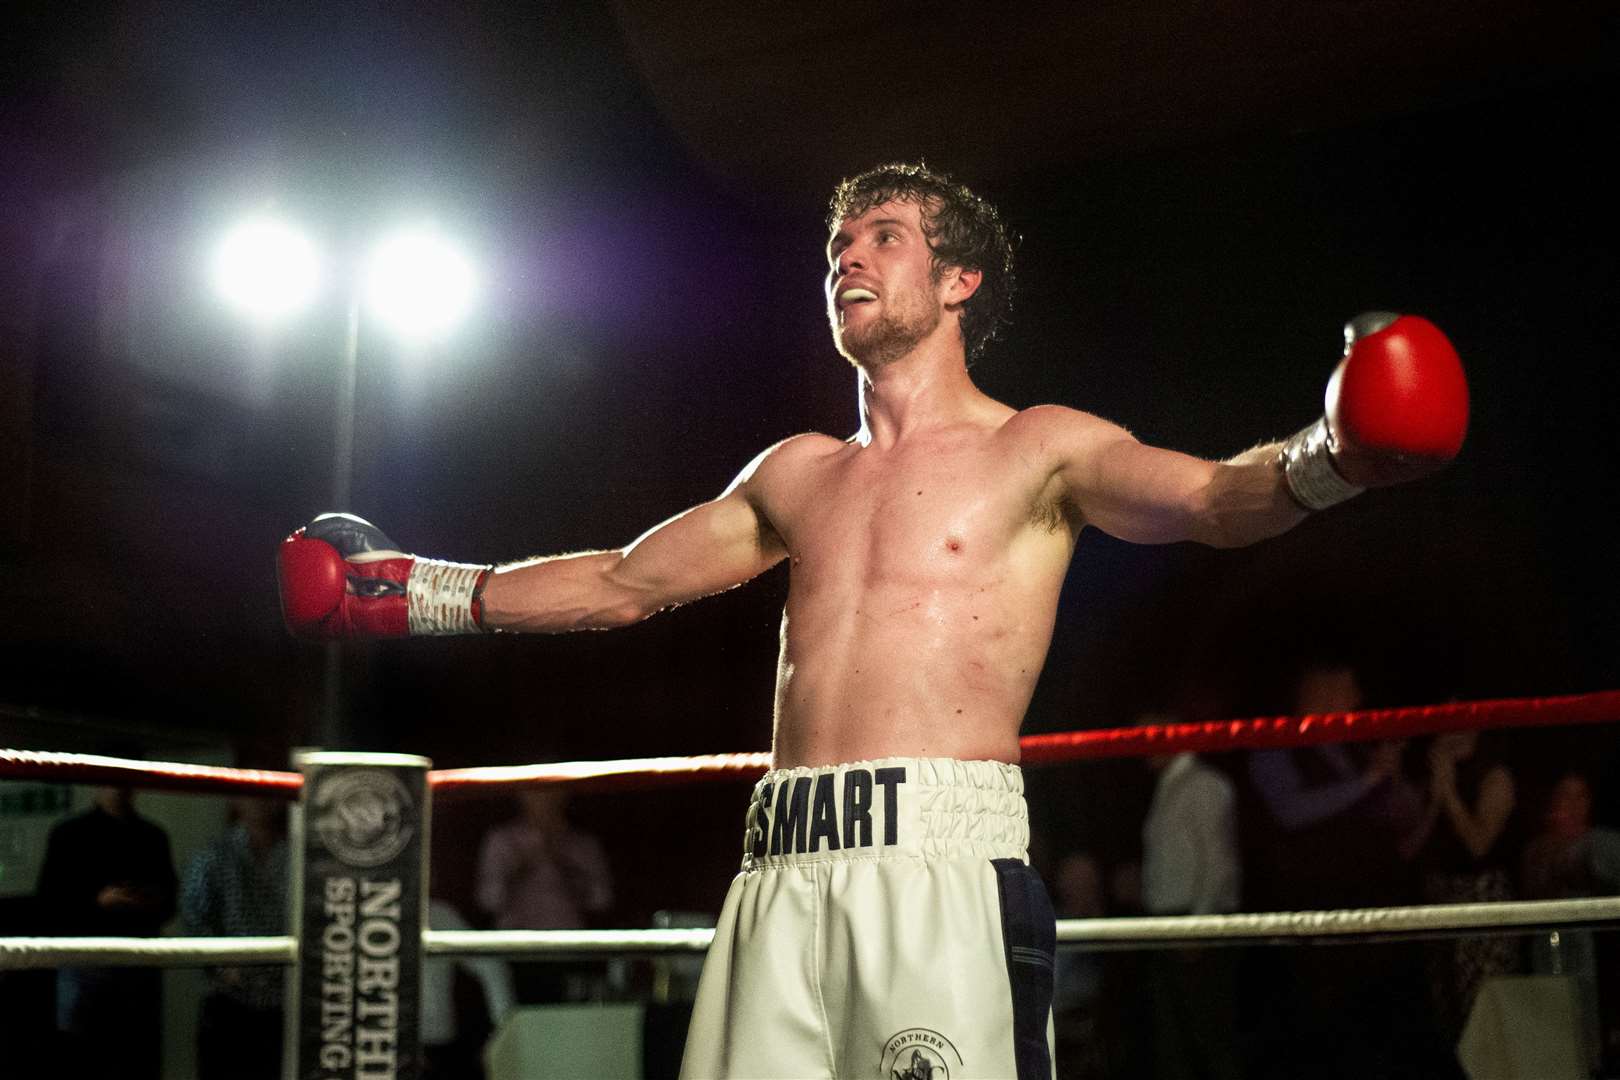 Andrew Smart has five pro wins under his belt and could land himself a shot at the Scottish title.